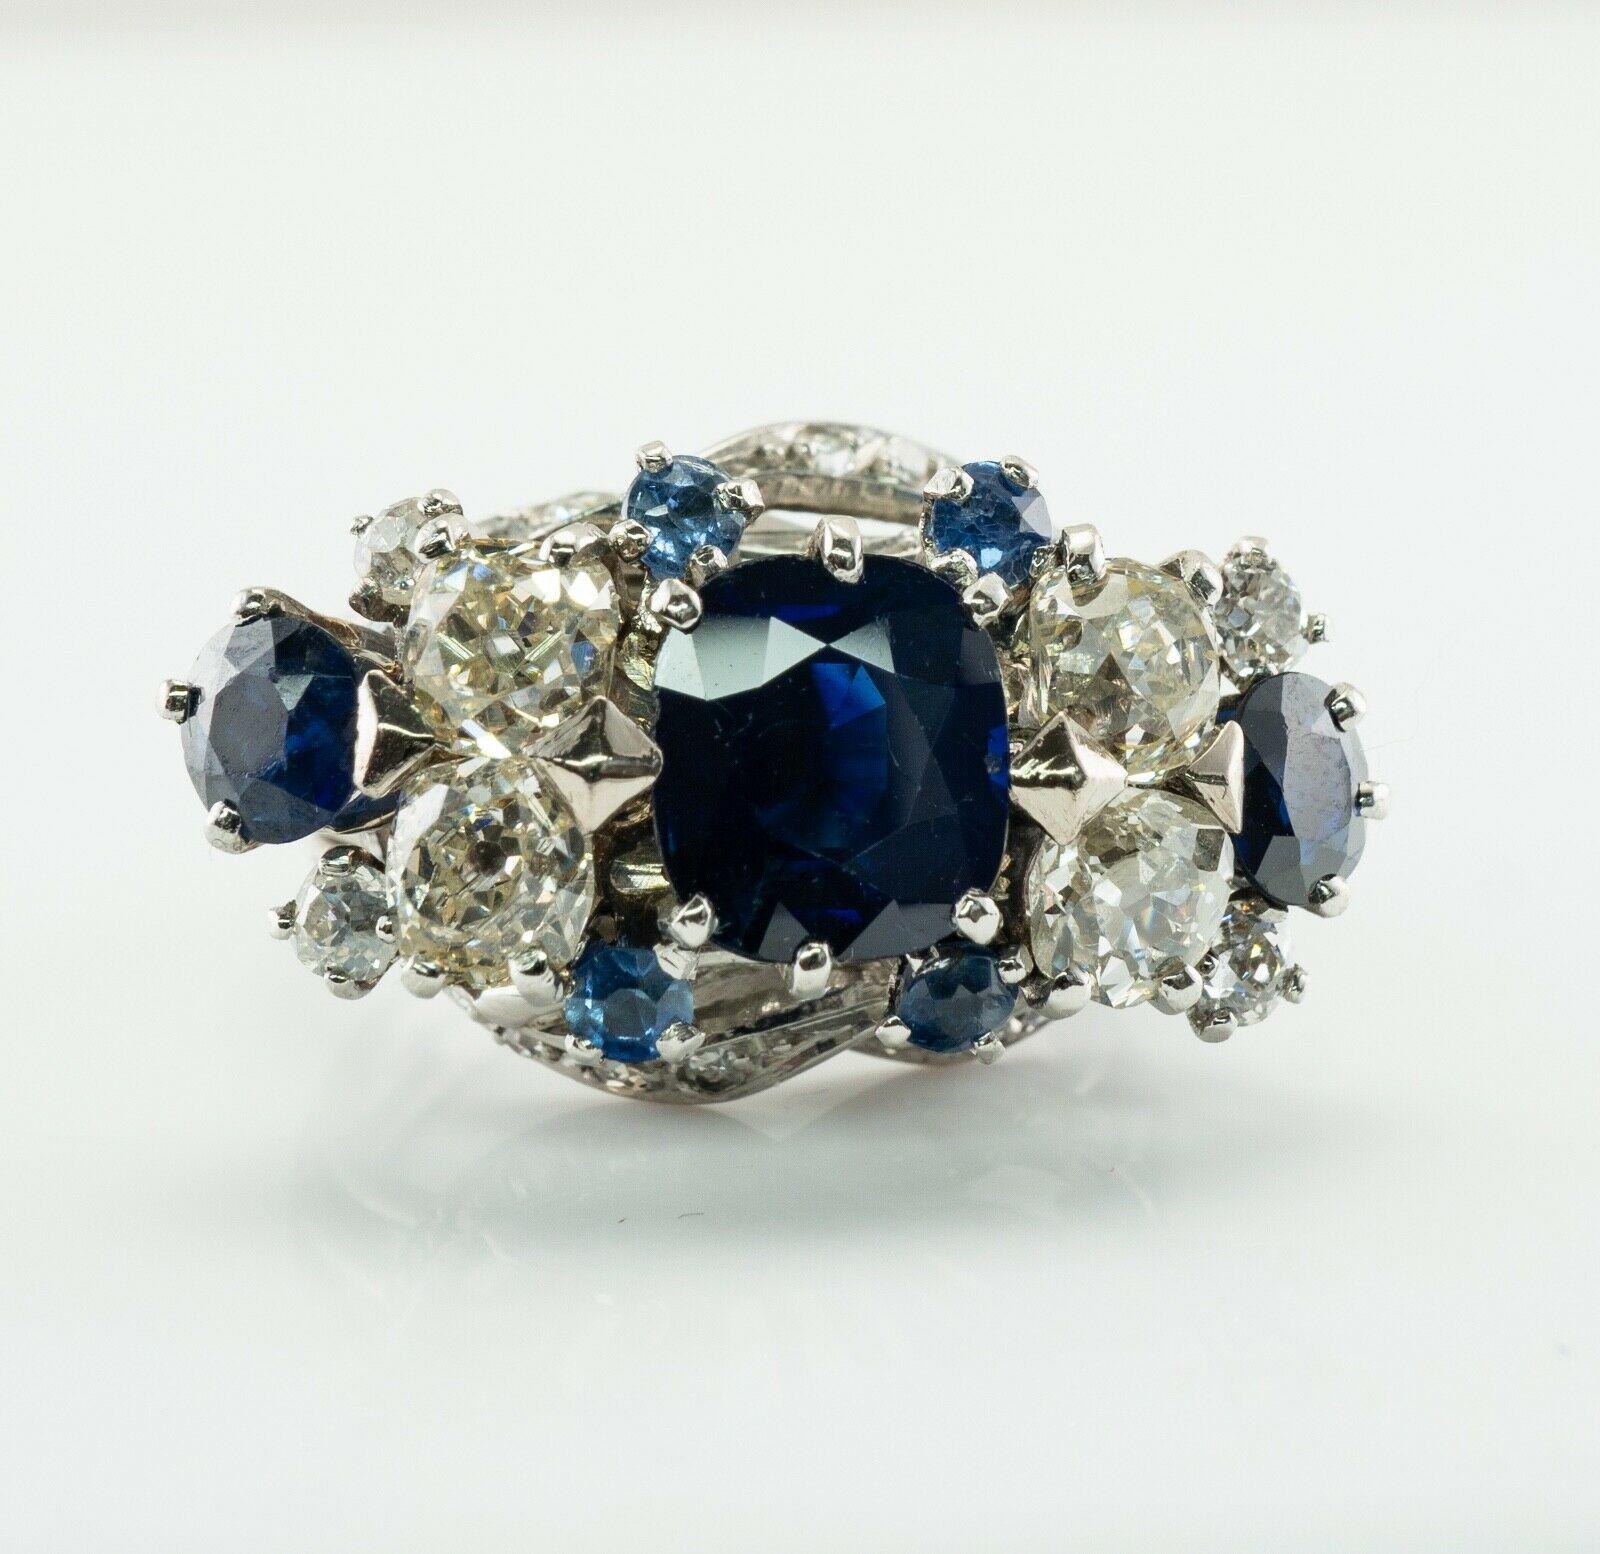 Diamond Sapphire Ring Cluster Vinatge 18K White Gold Estate

This vintage ring is finely crafted in solid 18K White Gold (carefully tested and guaranteed). The center natural Earth mined Sapphire measures 9x7mm (2.20 carats). Two round cut sapphires